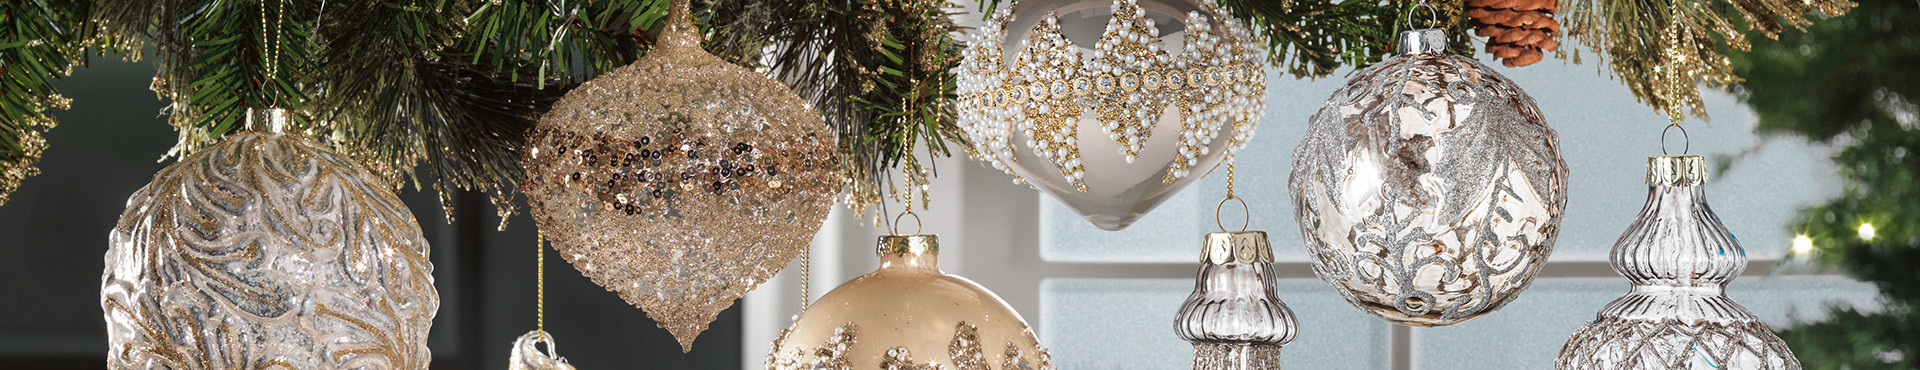 Spheres and tree decorations